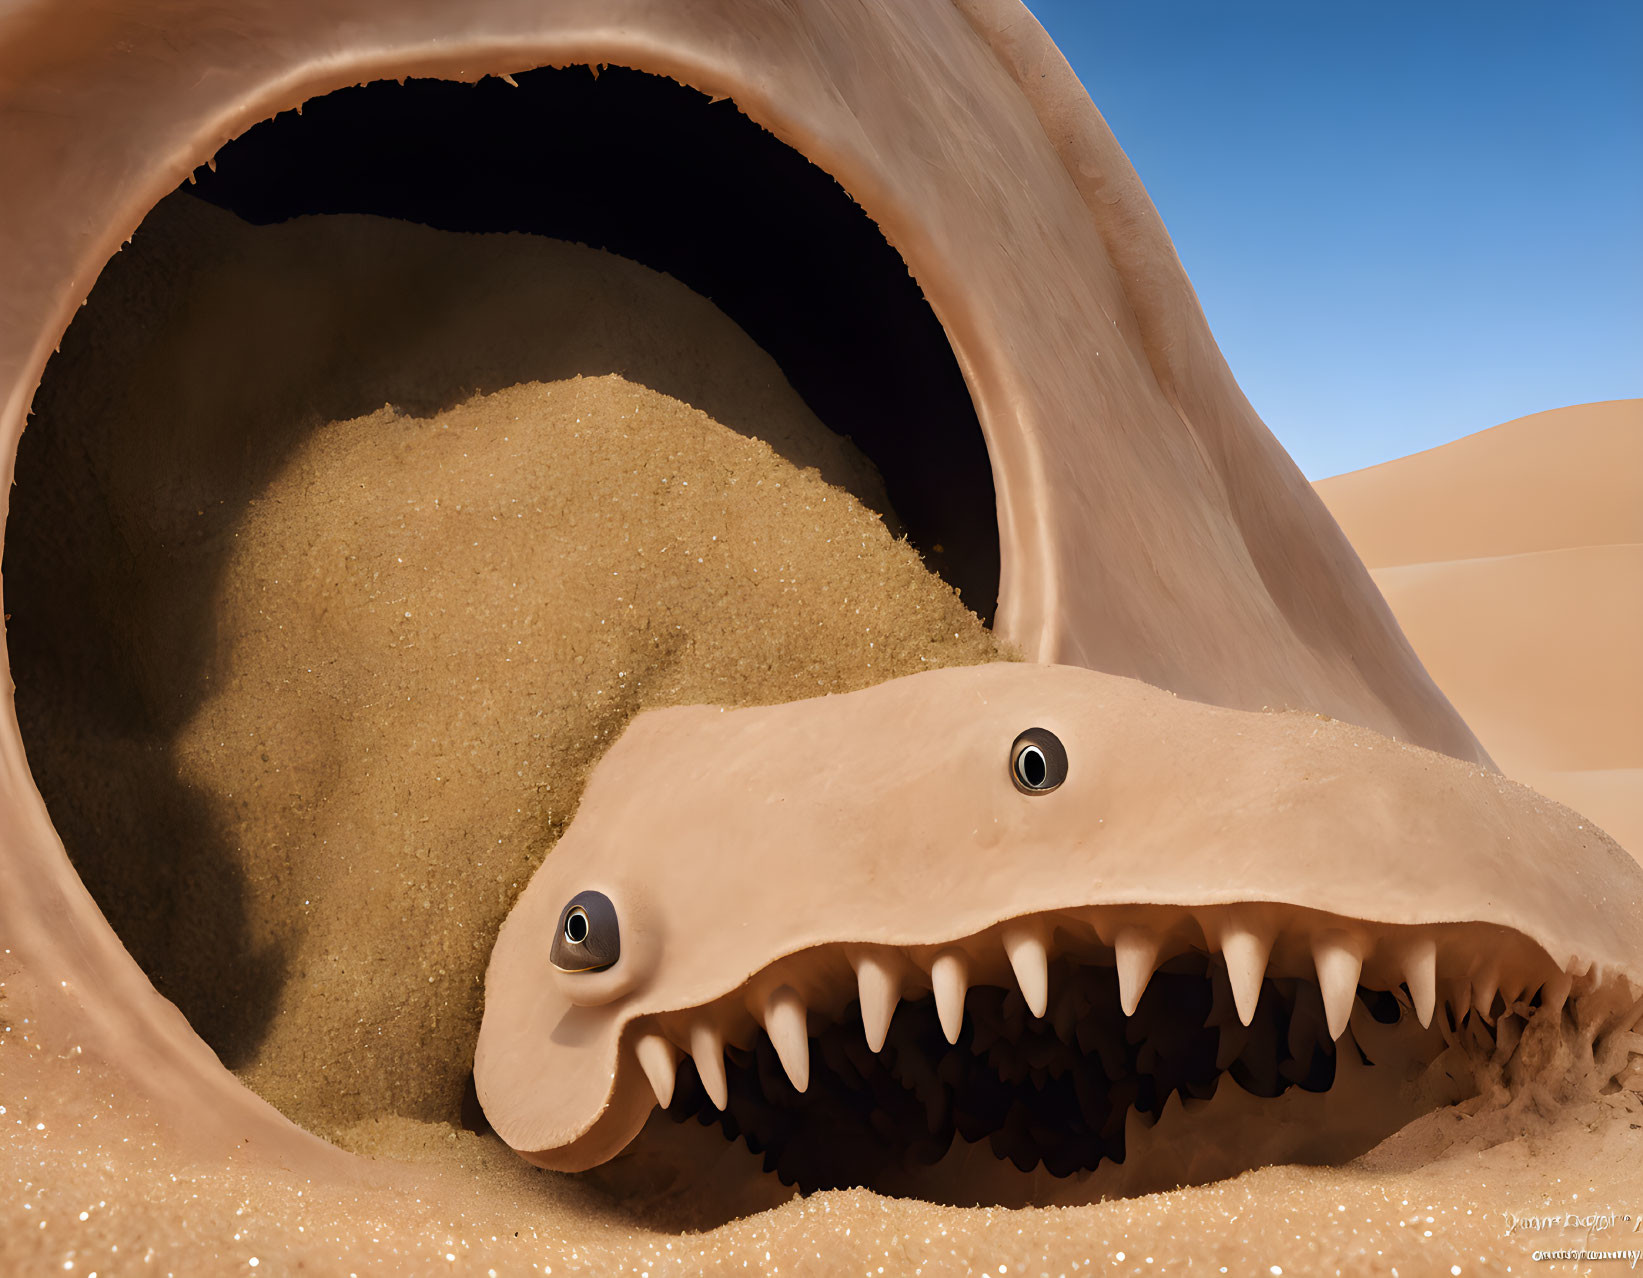 Surreal desert scene with giant sandworm and sand dunes